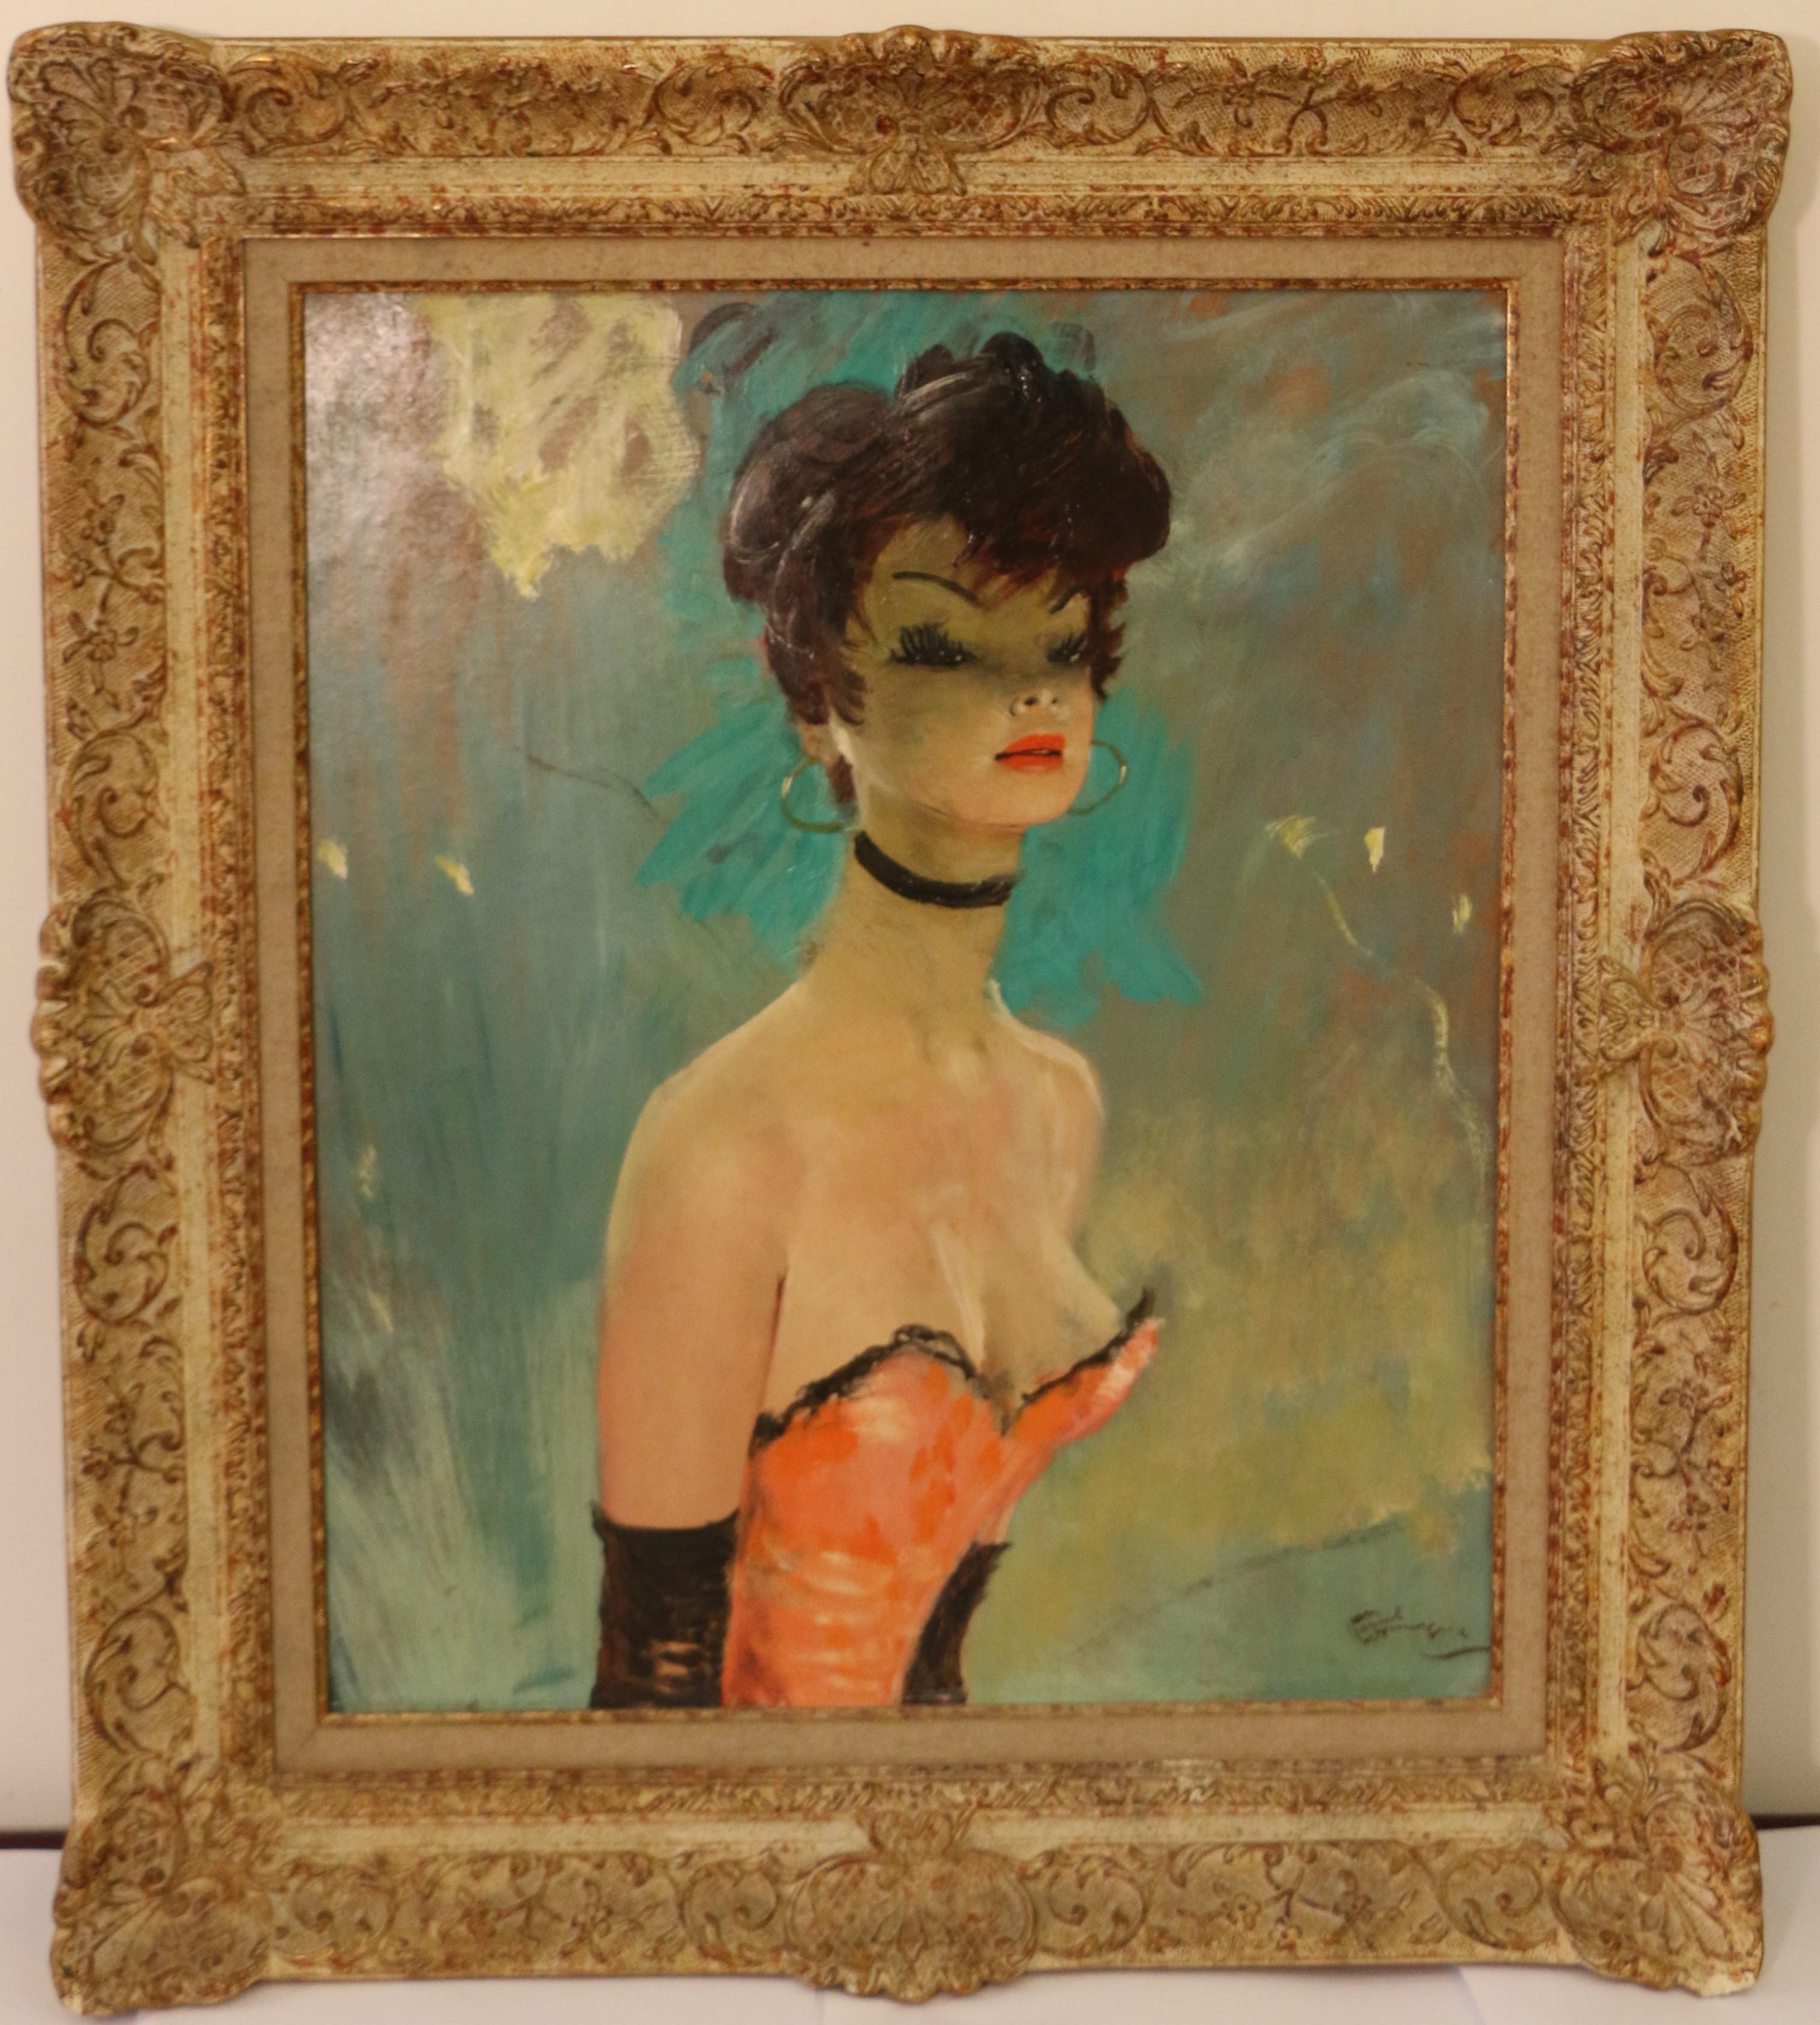 This stunning portrait of Caroline is by Jean Gabriel Domergue (1889-1962). It was painted circa 1950. Oil on hardboard. It has a great dimension 65 x 54cm, Signed bottom right. Titled on the reverse 